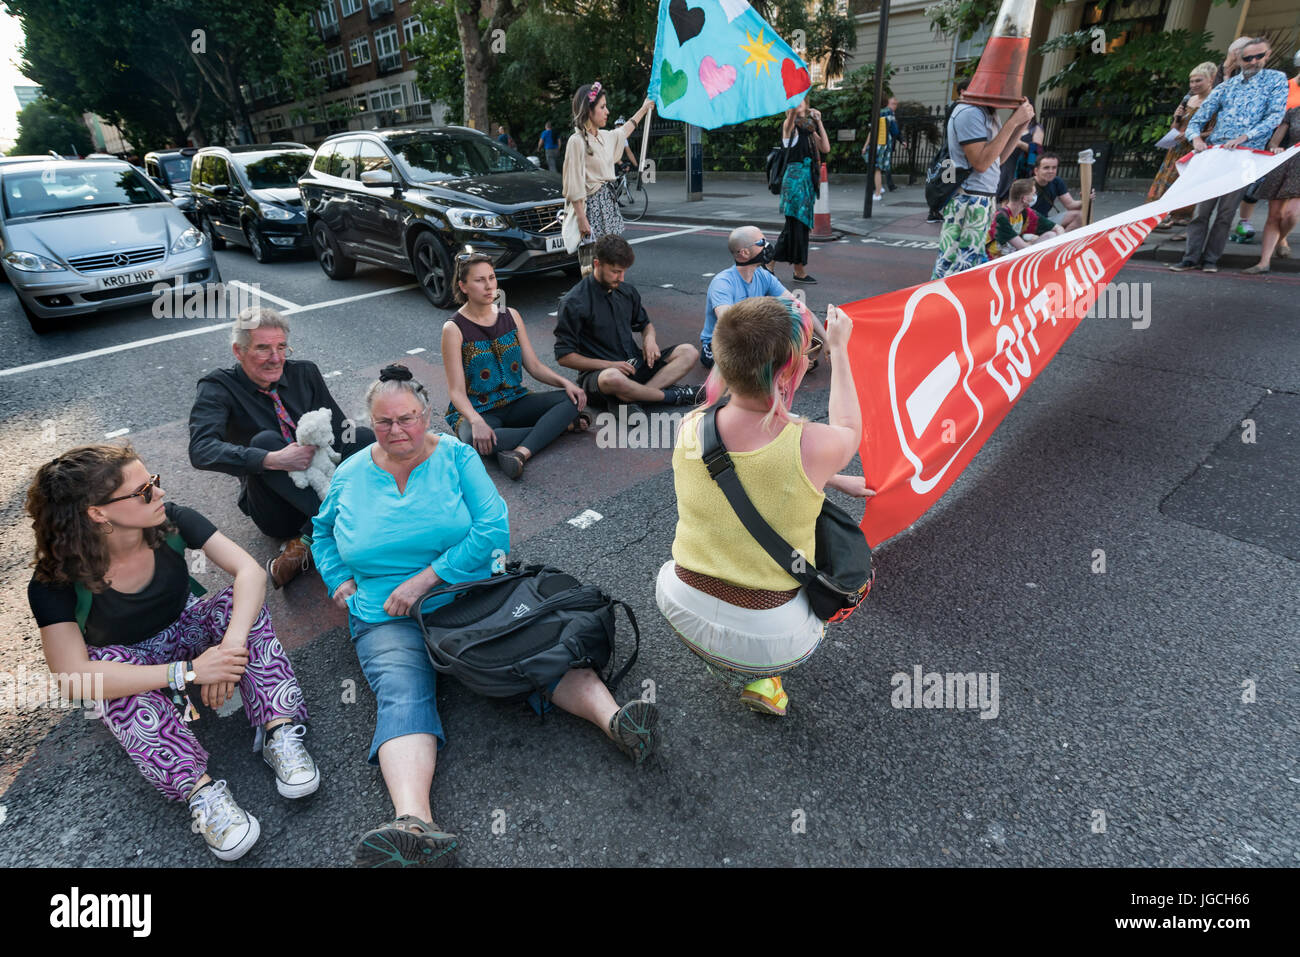 London, UK. 5th July 2017. Rising Up campaigners sit on the road and get out the banner for their brief 'Staying' Alive' road-block disco on the east-bound carriageway of the Marylebone Road near Baker St to raise awareness about the terribly high pollution levels on London streets caused largely by traffic. They walked onto a pedestrian crossing, raised a banner, spoke briefly about the problem and then danced, holding up notices to the blocked motorists apologising  for the protest but pointing out that urgent action was needed and the protest would be short. One Volvo driver got out of his  Stock Photo